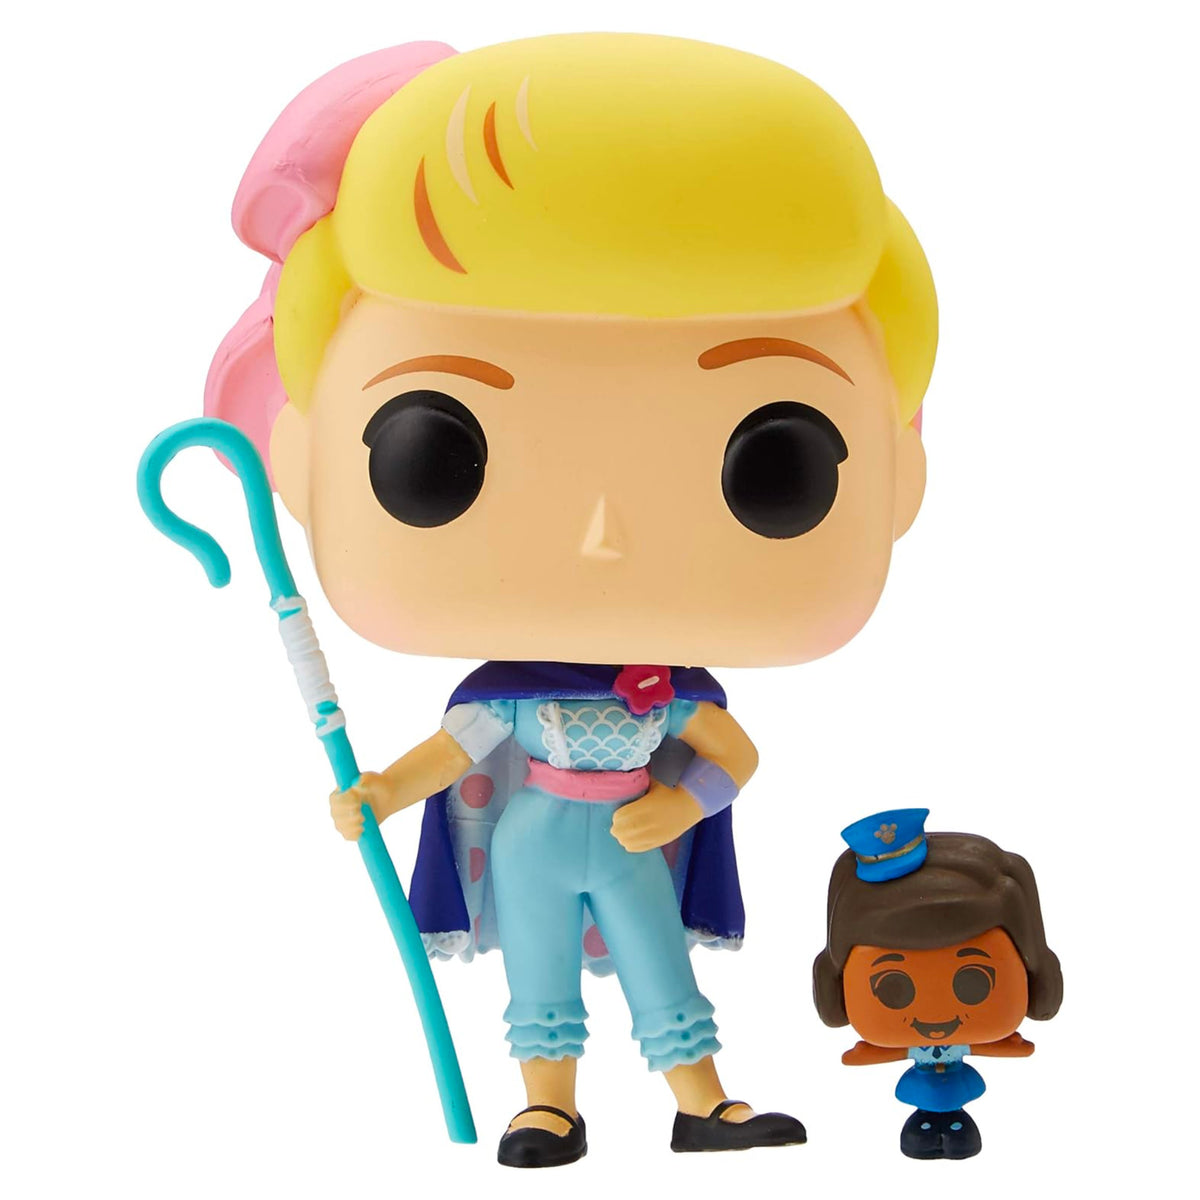 Funko POP - Toy Story 4 Bo Peep with Officer Giggle McDimples #524